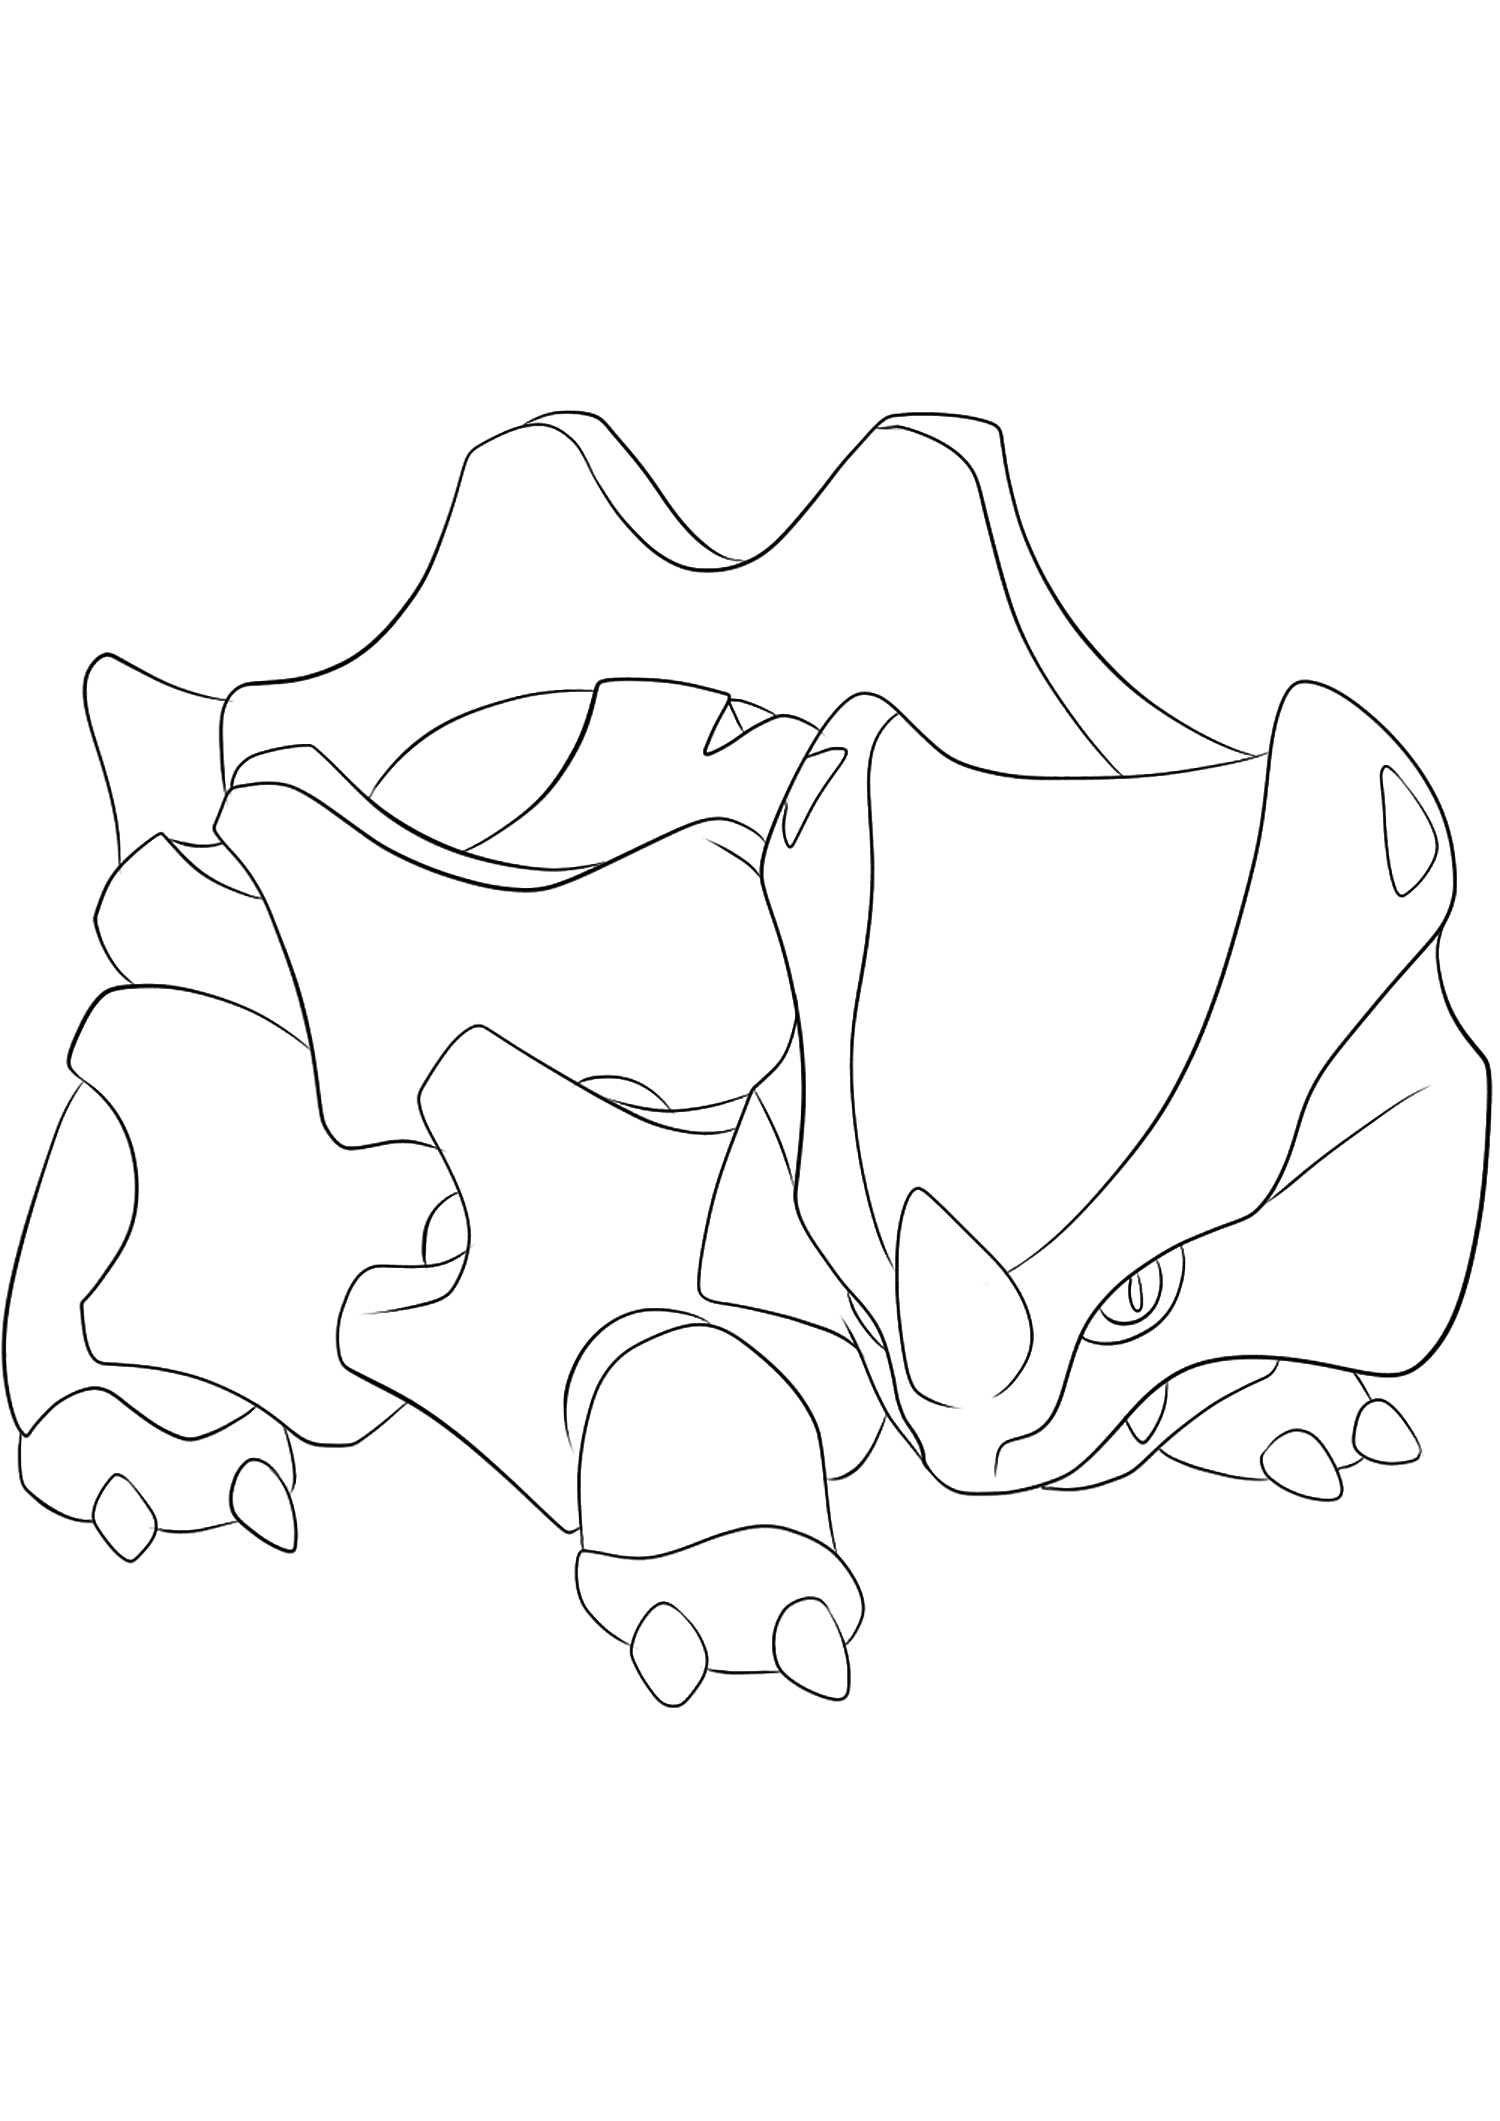 Rhyhorn (No.111). Rhyhorn Coloring page, Generation I Pokemon of type Ground and RockOriginal image credit: Pokemon linearts by Lilly Gerbil on Deviantart.Permission:  All rights reserved © Pokemon company and Ken Sugimori.